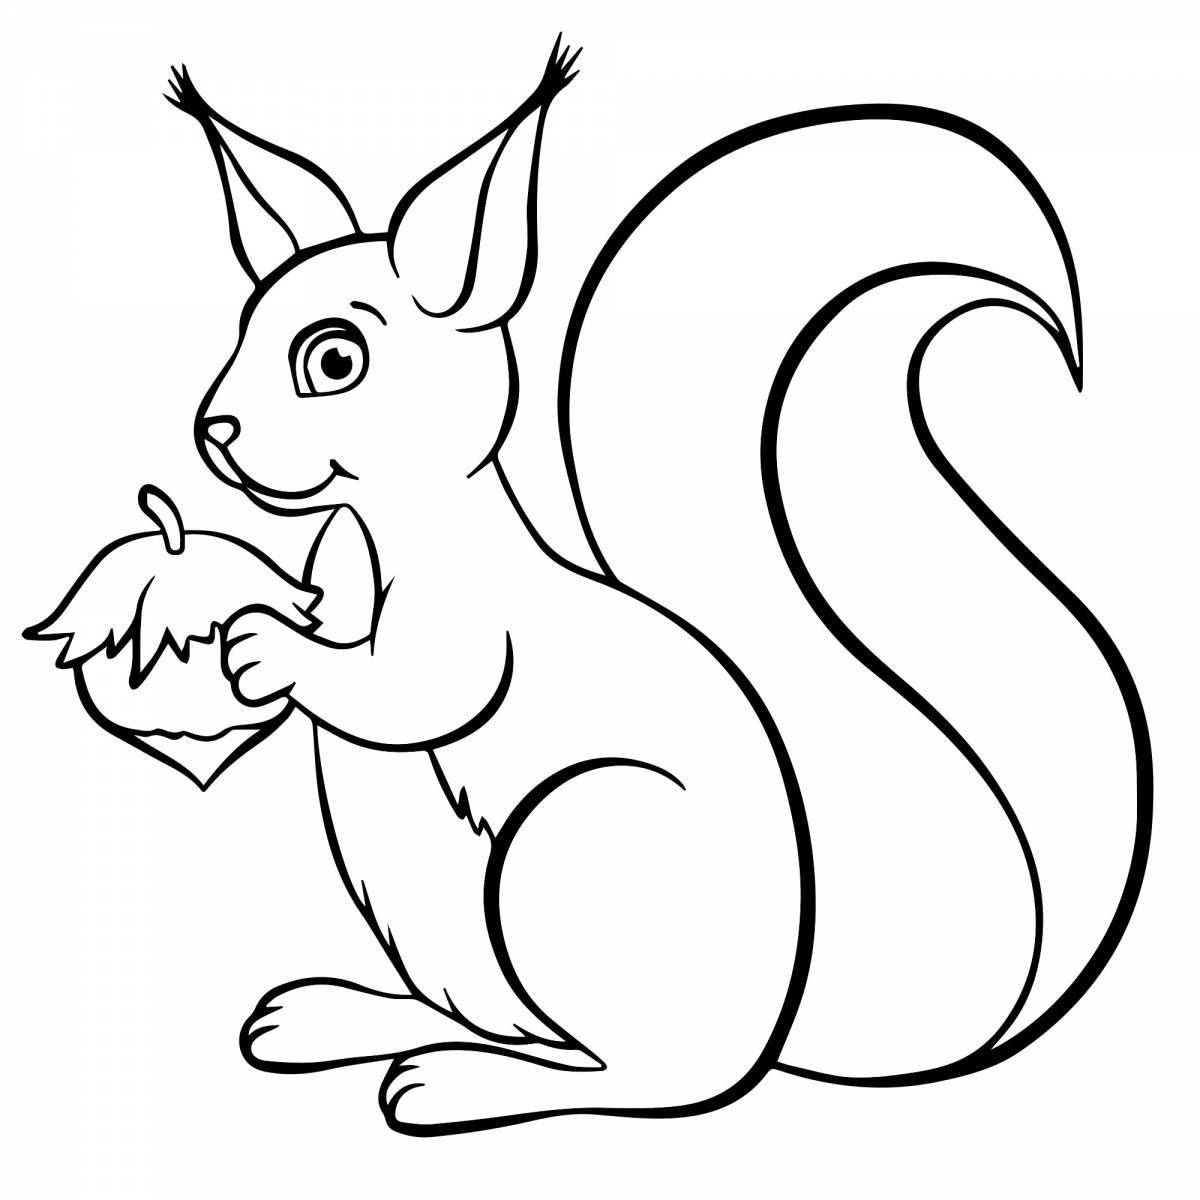 Creative drawing of a squirrel for children